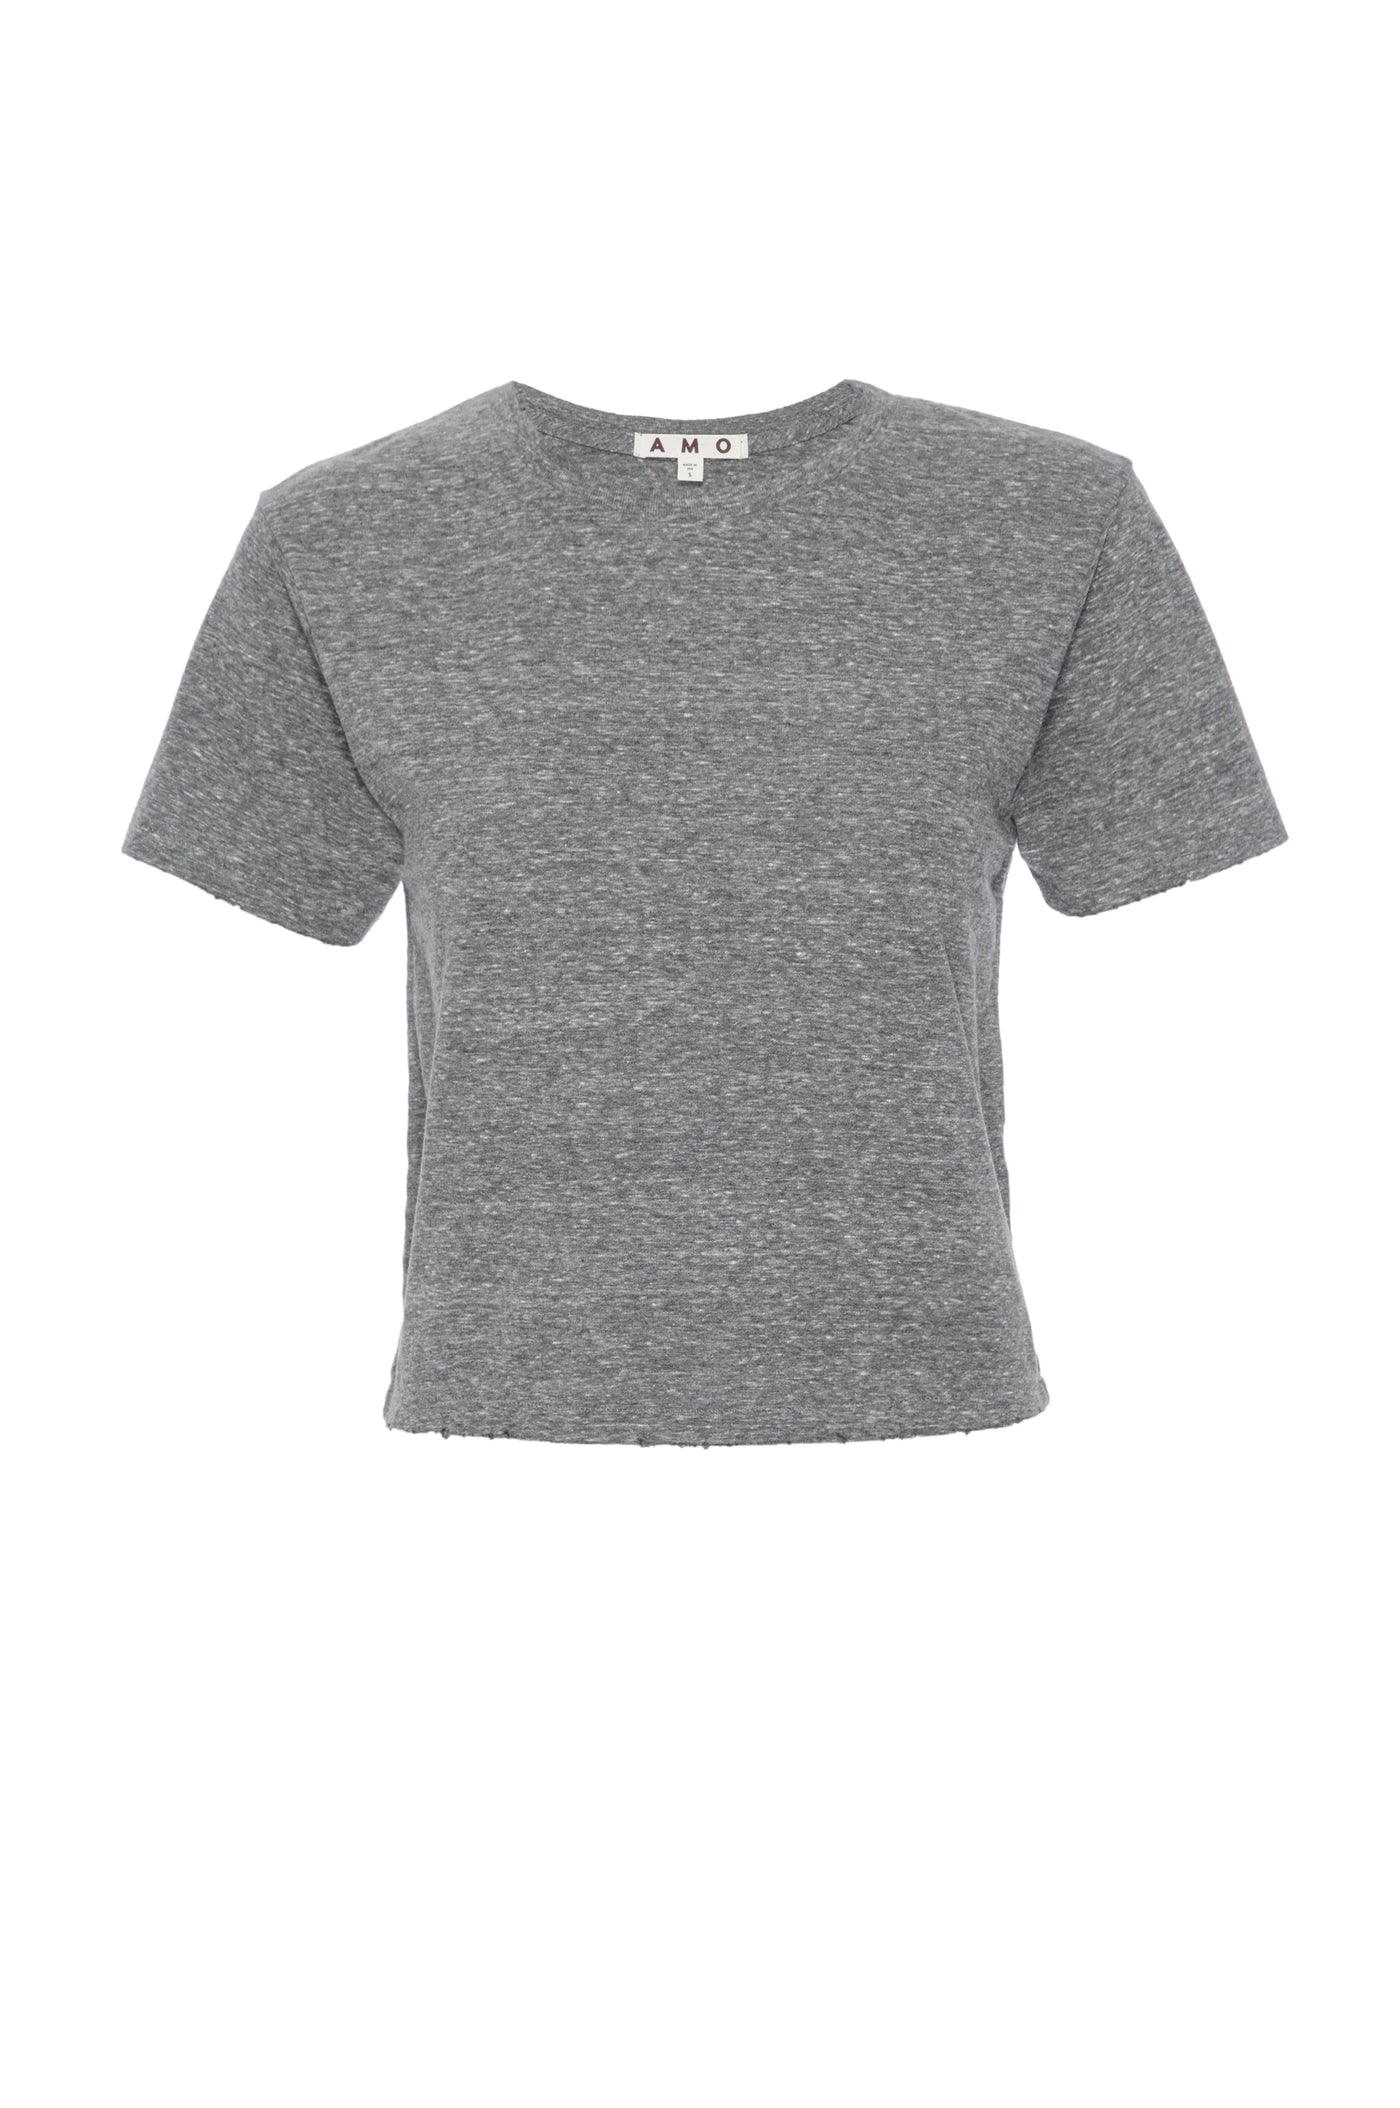 BABE TEE IN HEATHER GREY - Romi Boutique